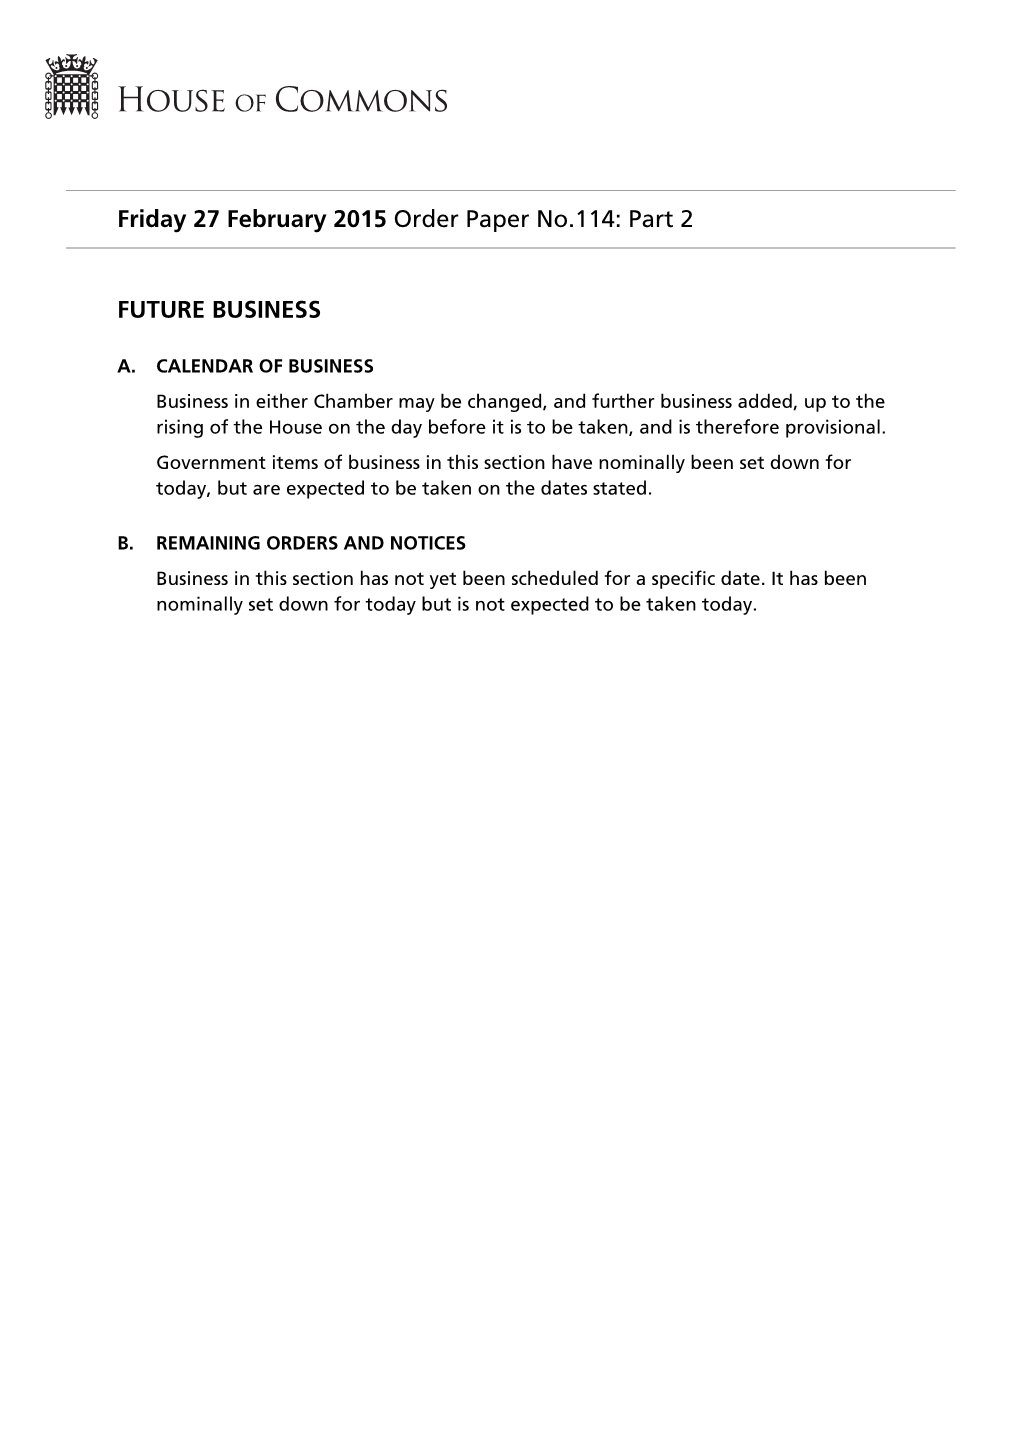 Friday 27 February 2015 Order Paper No.114: Part 2 FUTURE BUSINESS